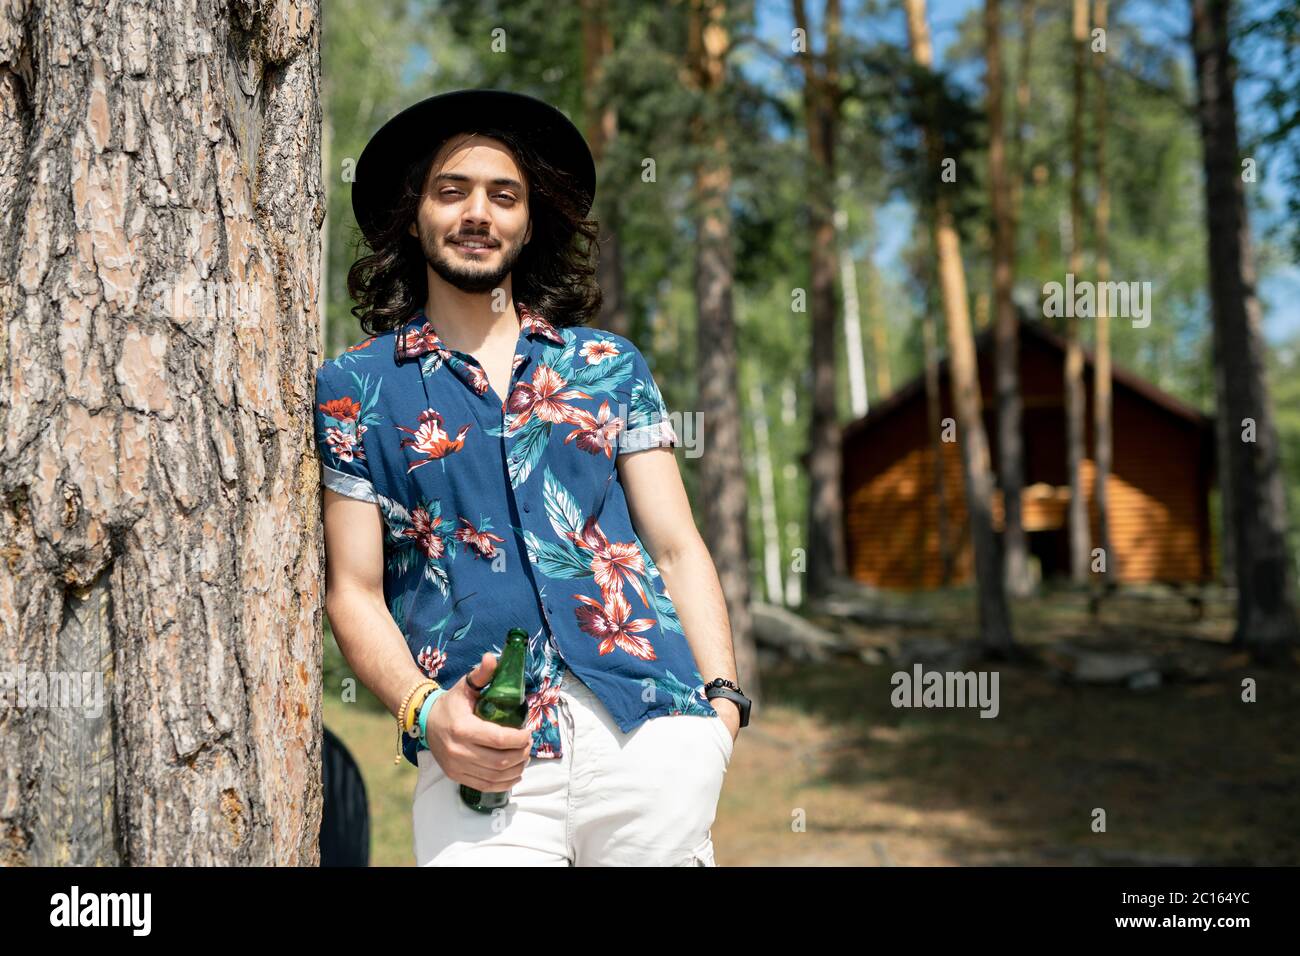 Portrait of positive hippie guy in flower shirt and hat leaning on tree and holding beer bottle in forest Stock Photo